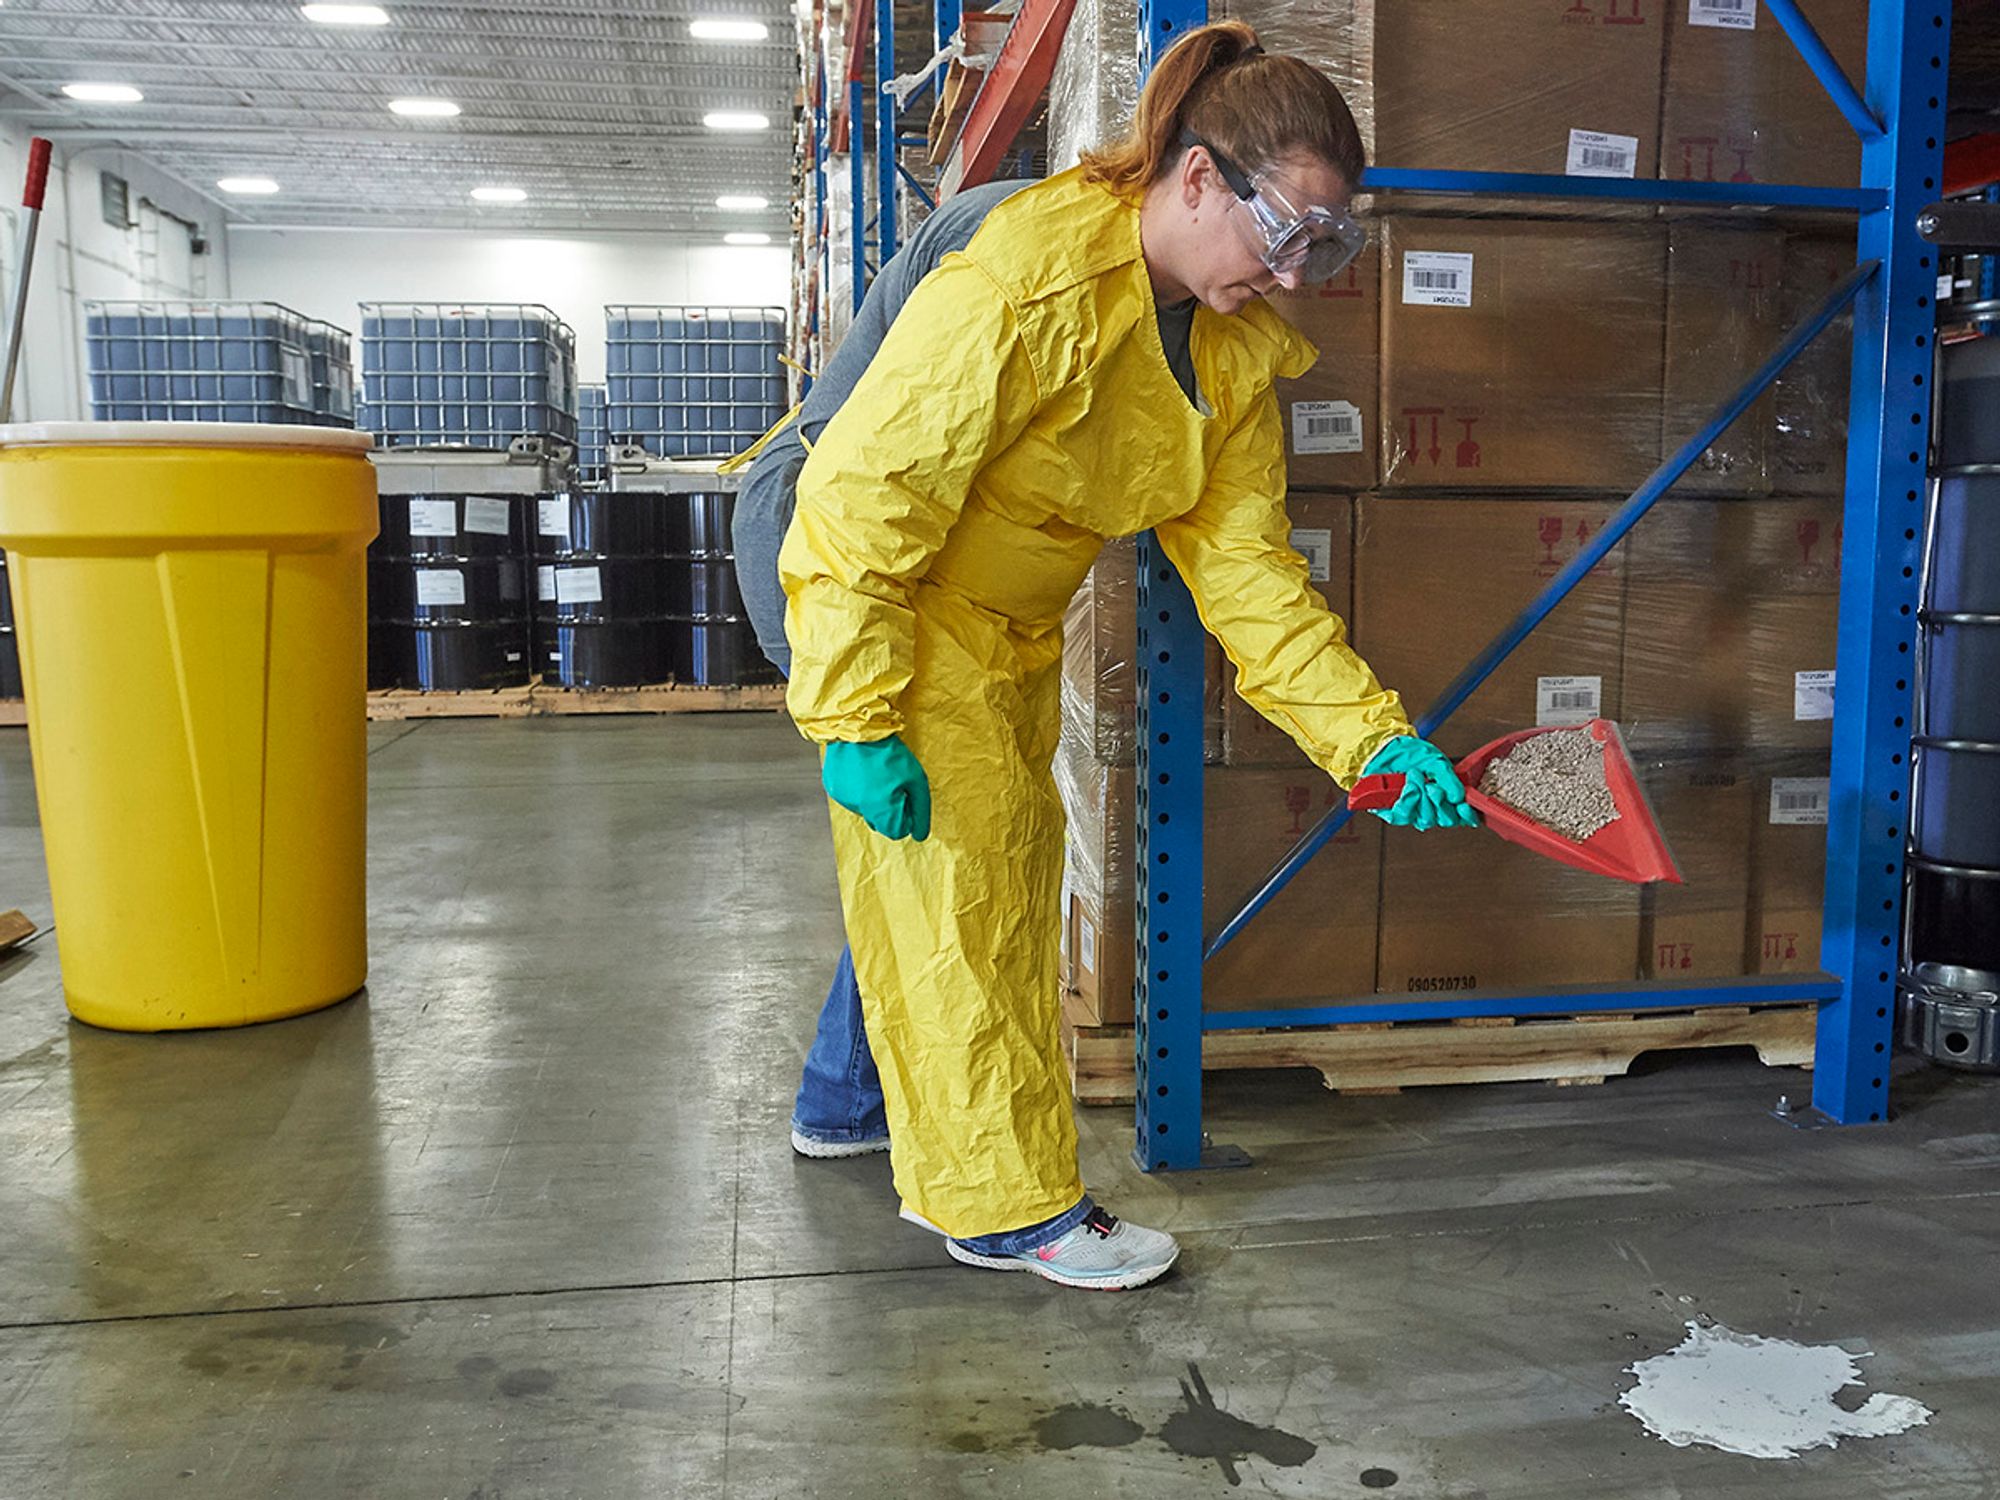 Cleanup of leaks or spills